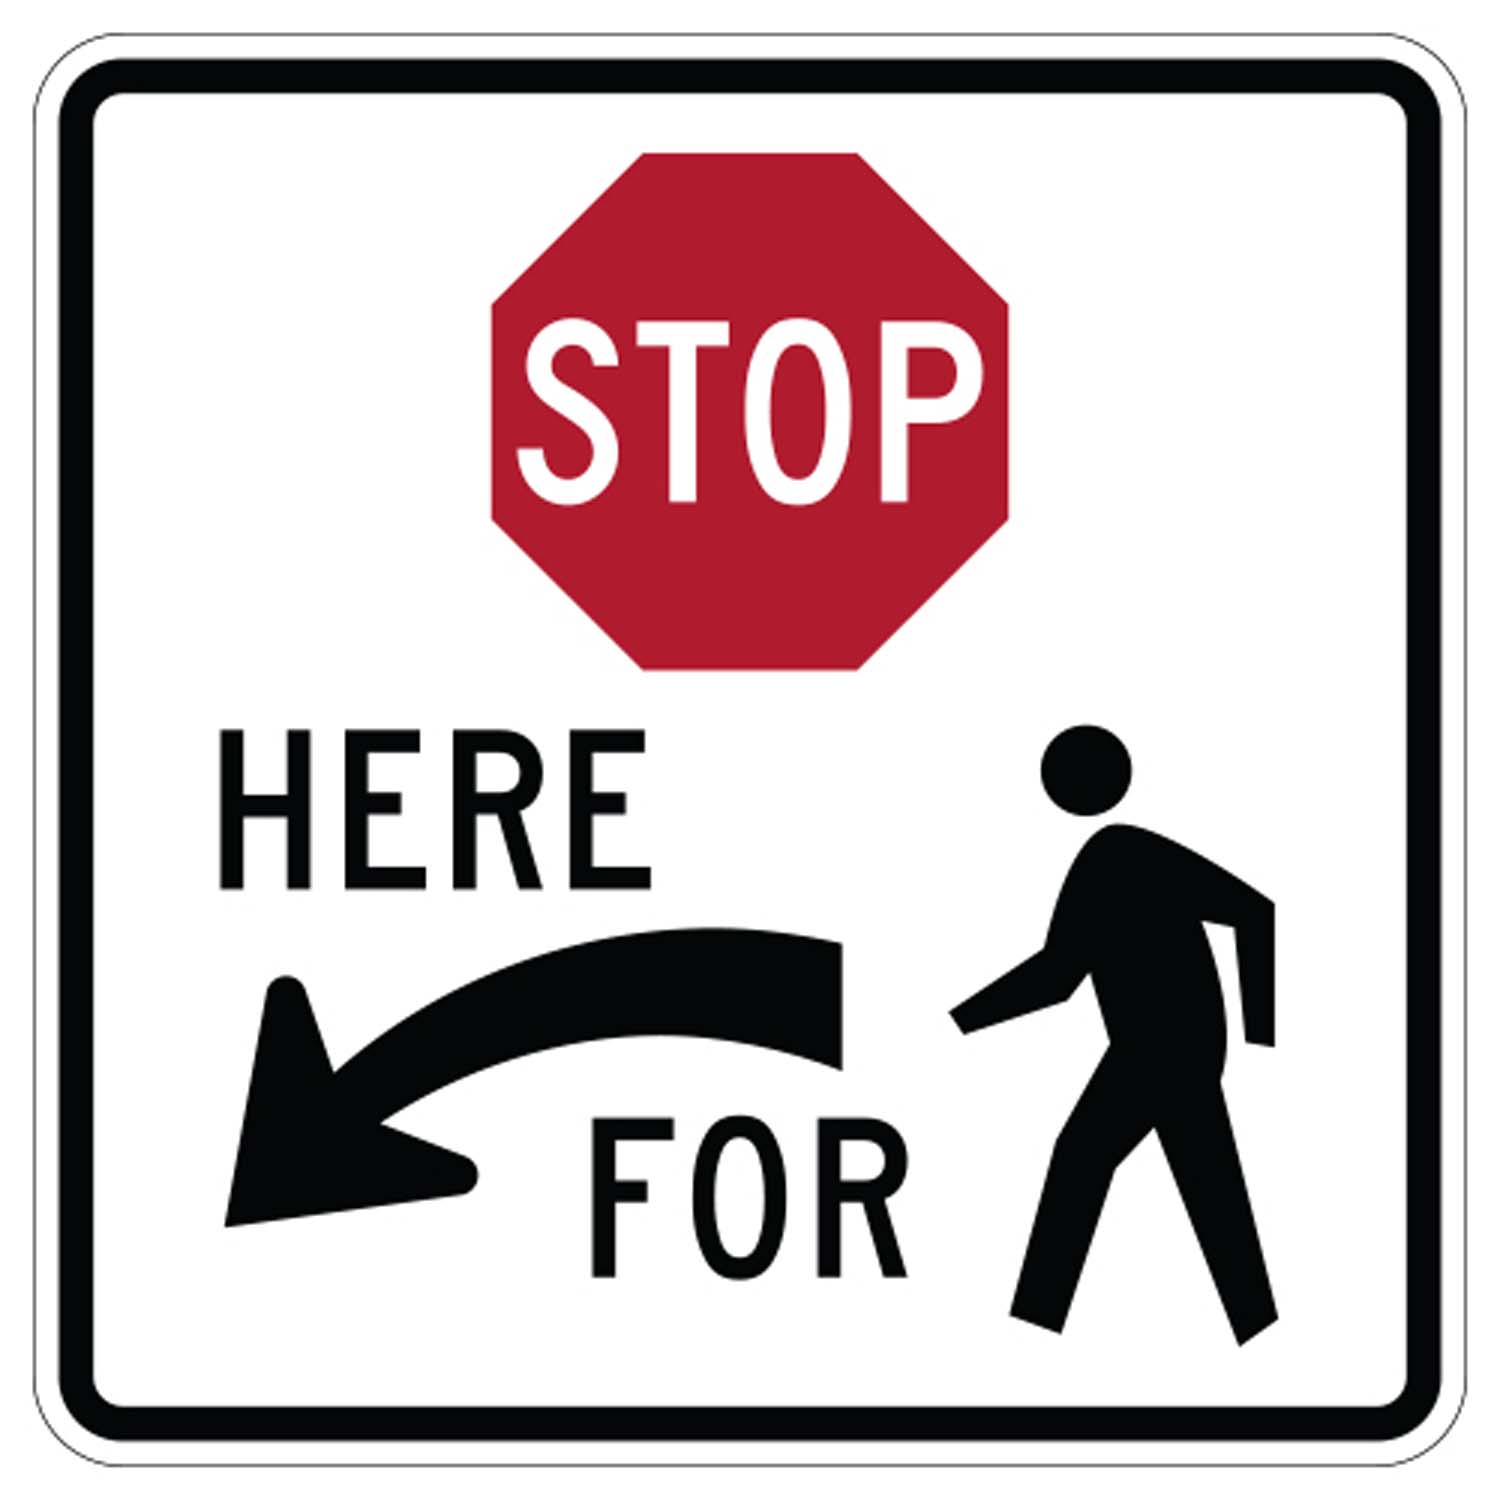 Shop Road Symbol Signs  Official MUTCD Compliant Signs